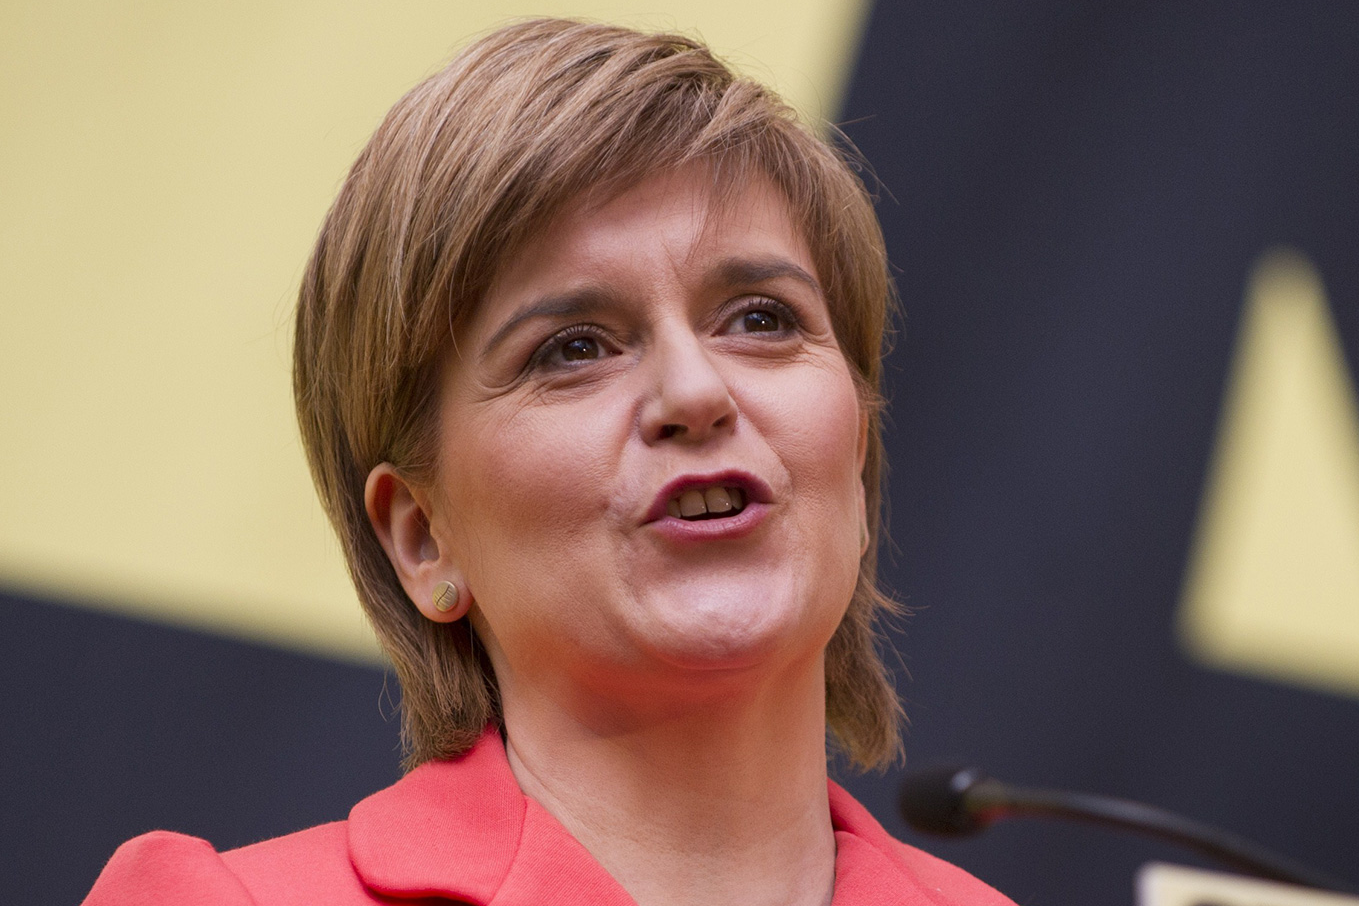 SNP: “Stronger for Scotland” (Getty)